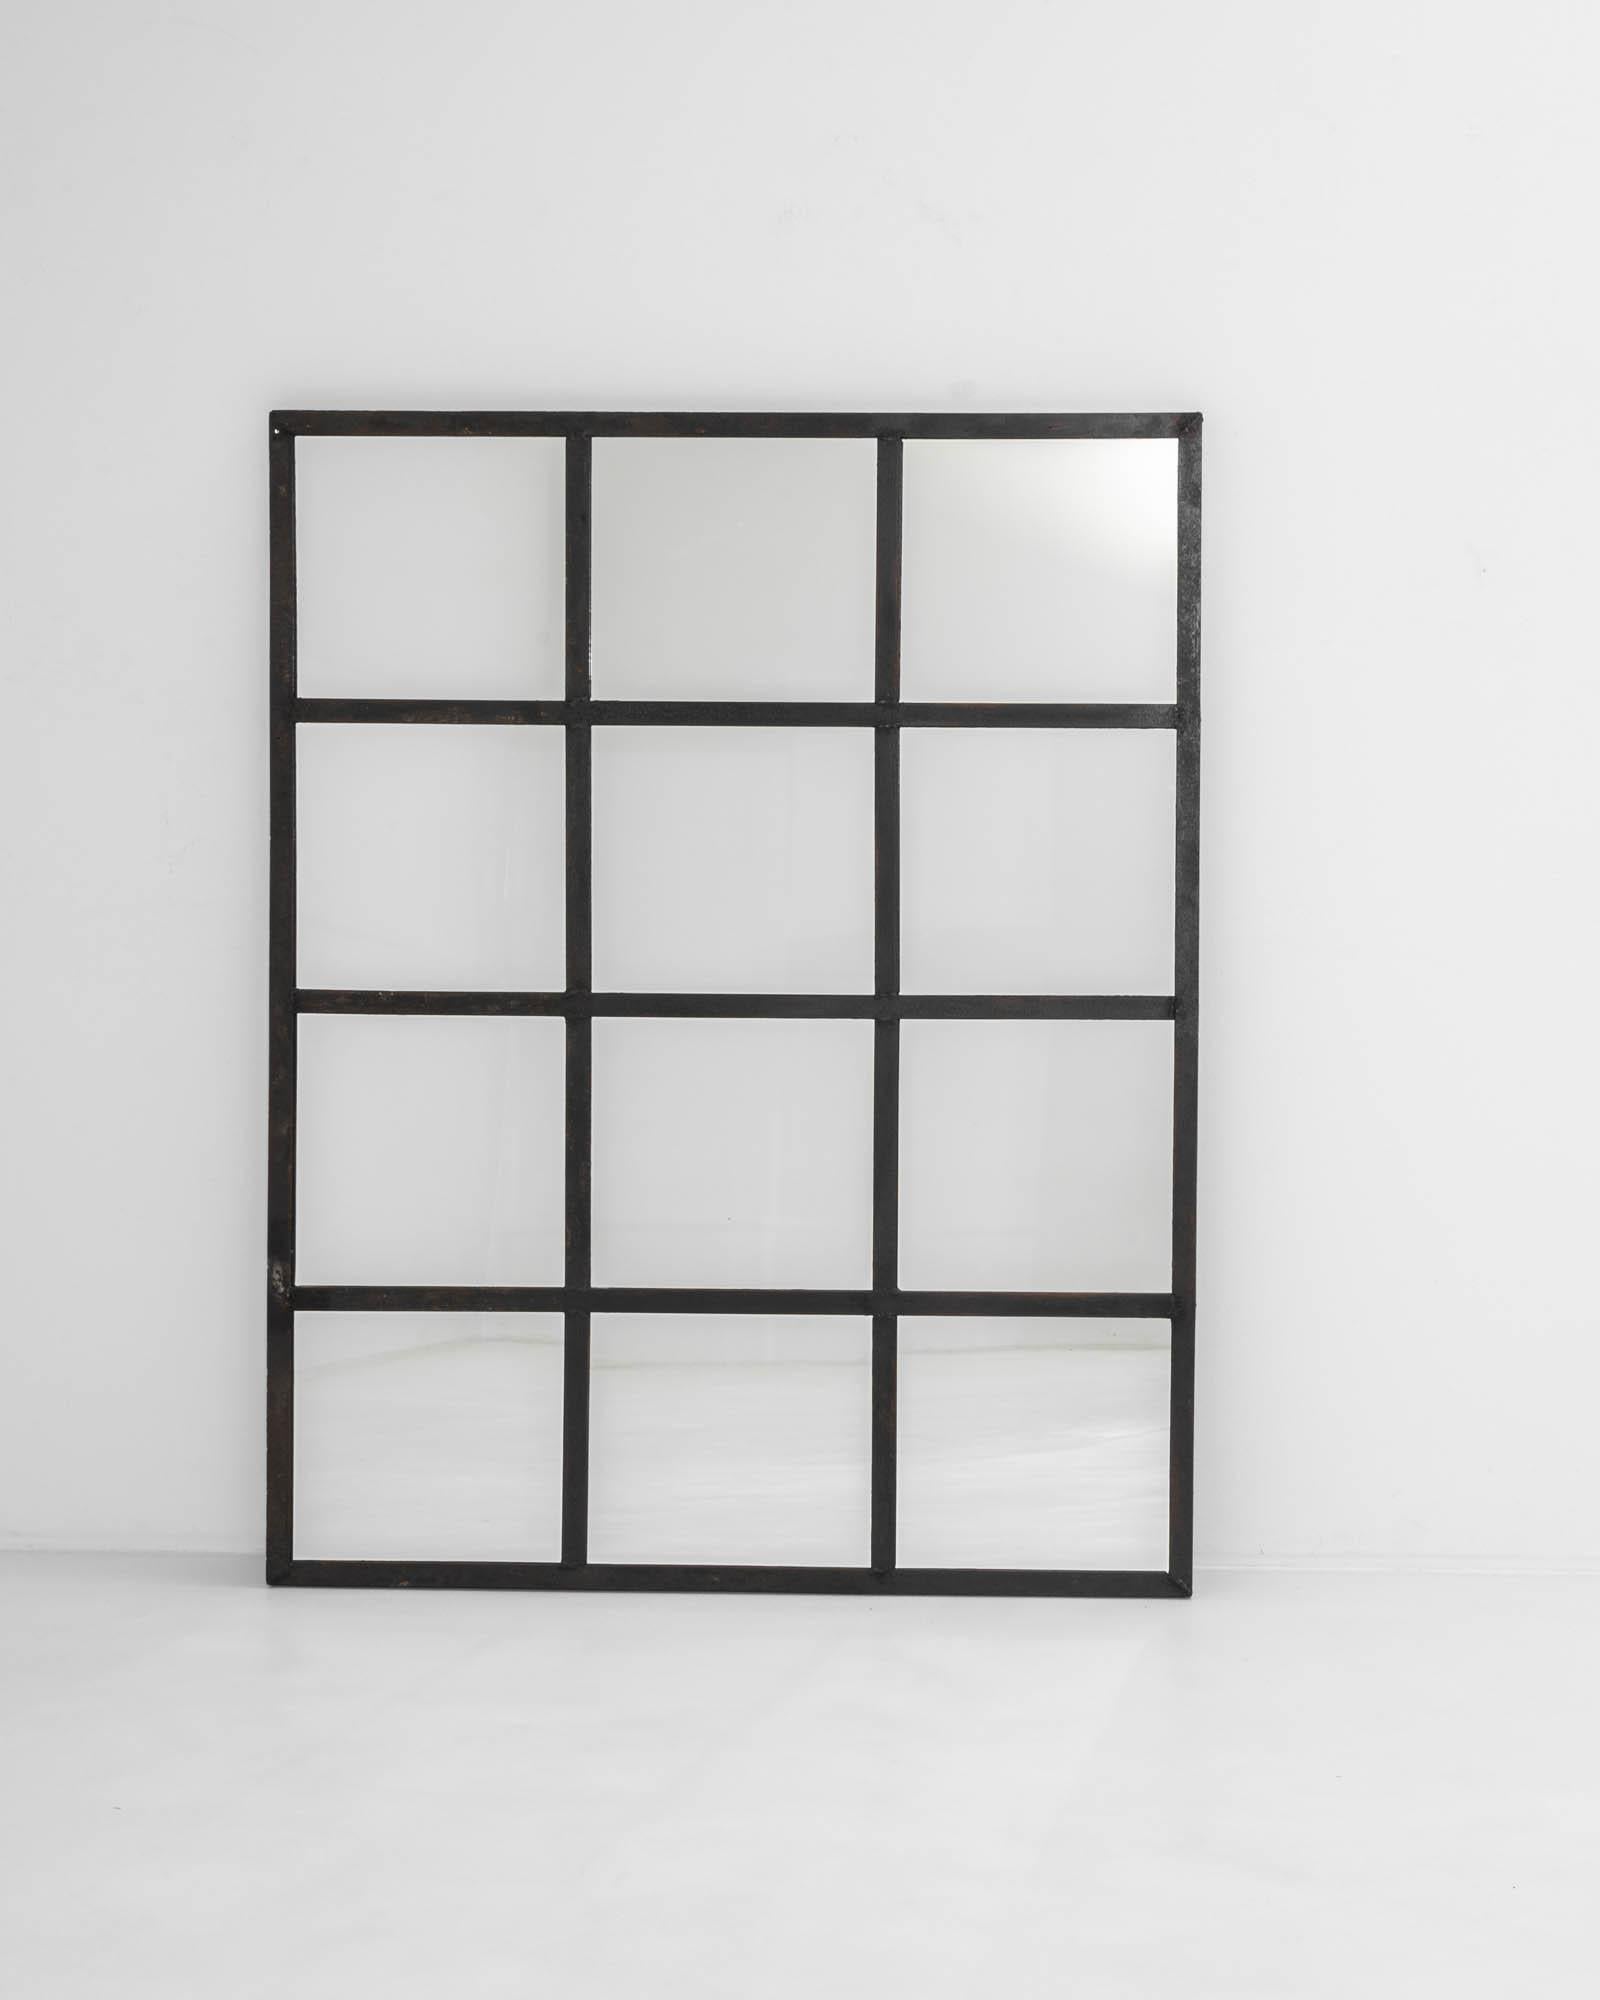 Mimicking the grid patterns of factory architecture, this French vintage-looking glass showcases 12 identical square mirrors enclosed within an industrial iron frame. The original paneled structure adds captivating dimensionality, creating a visual